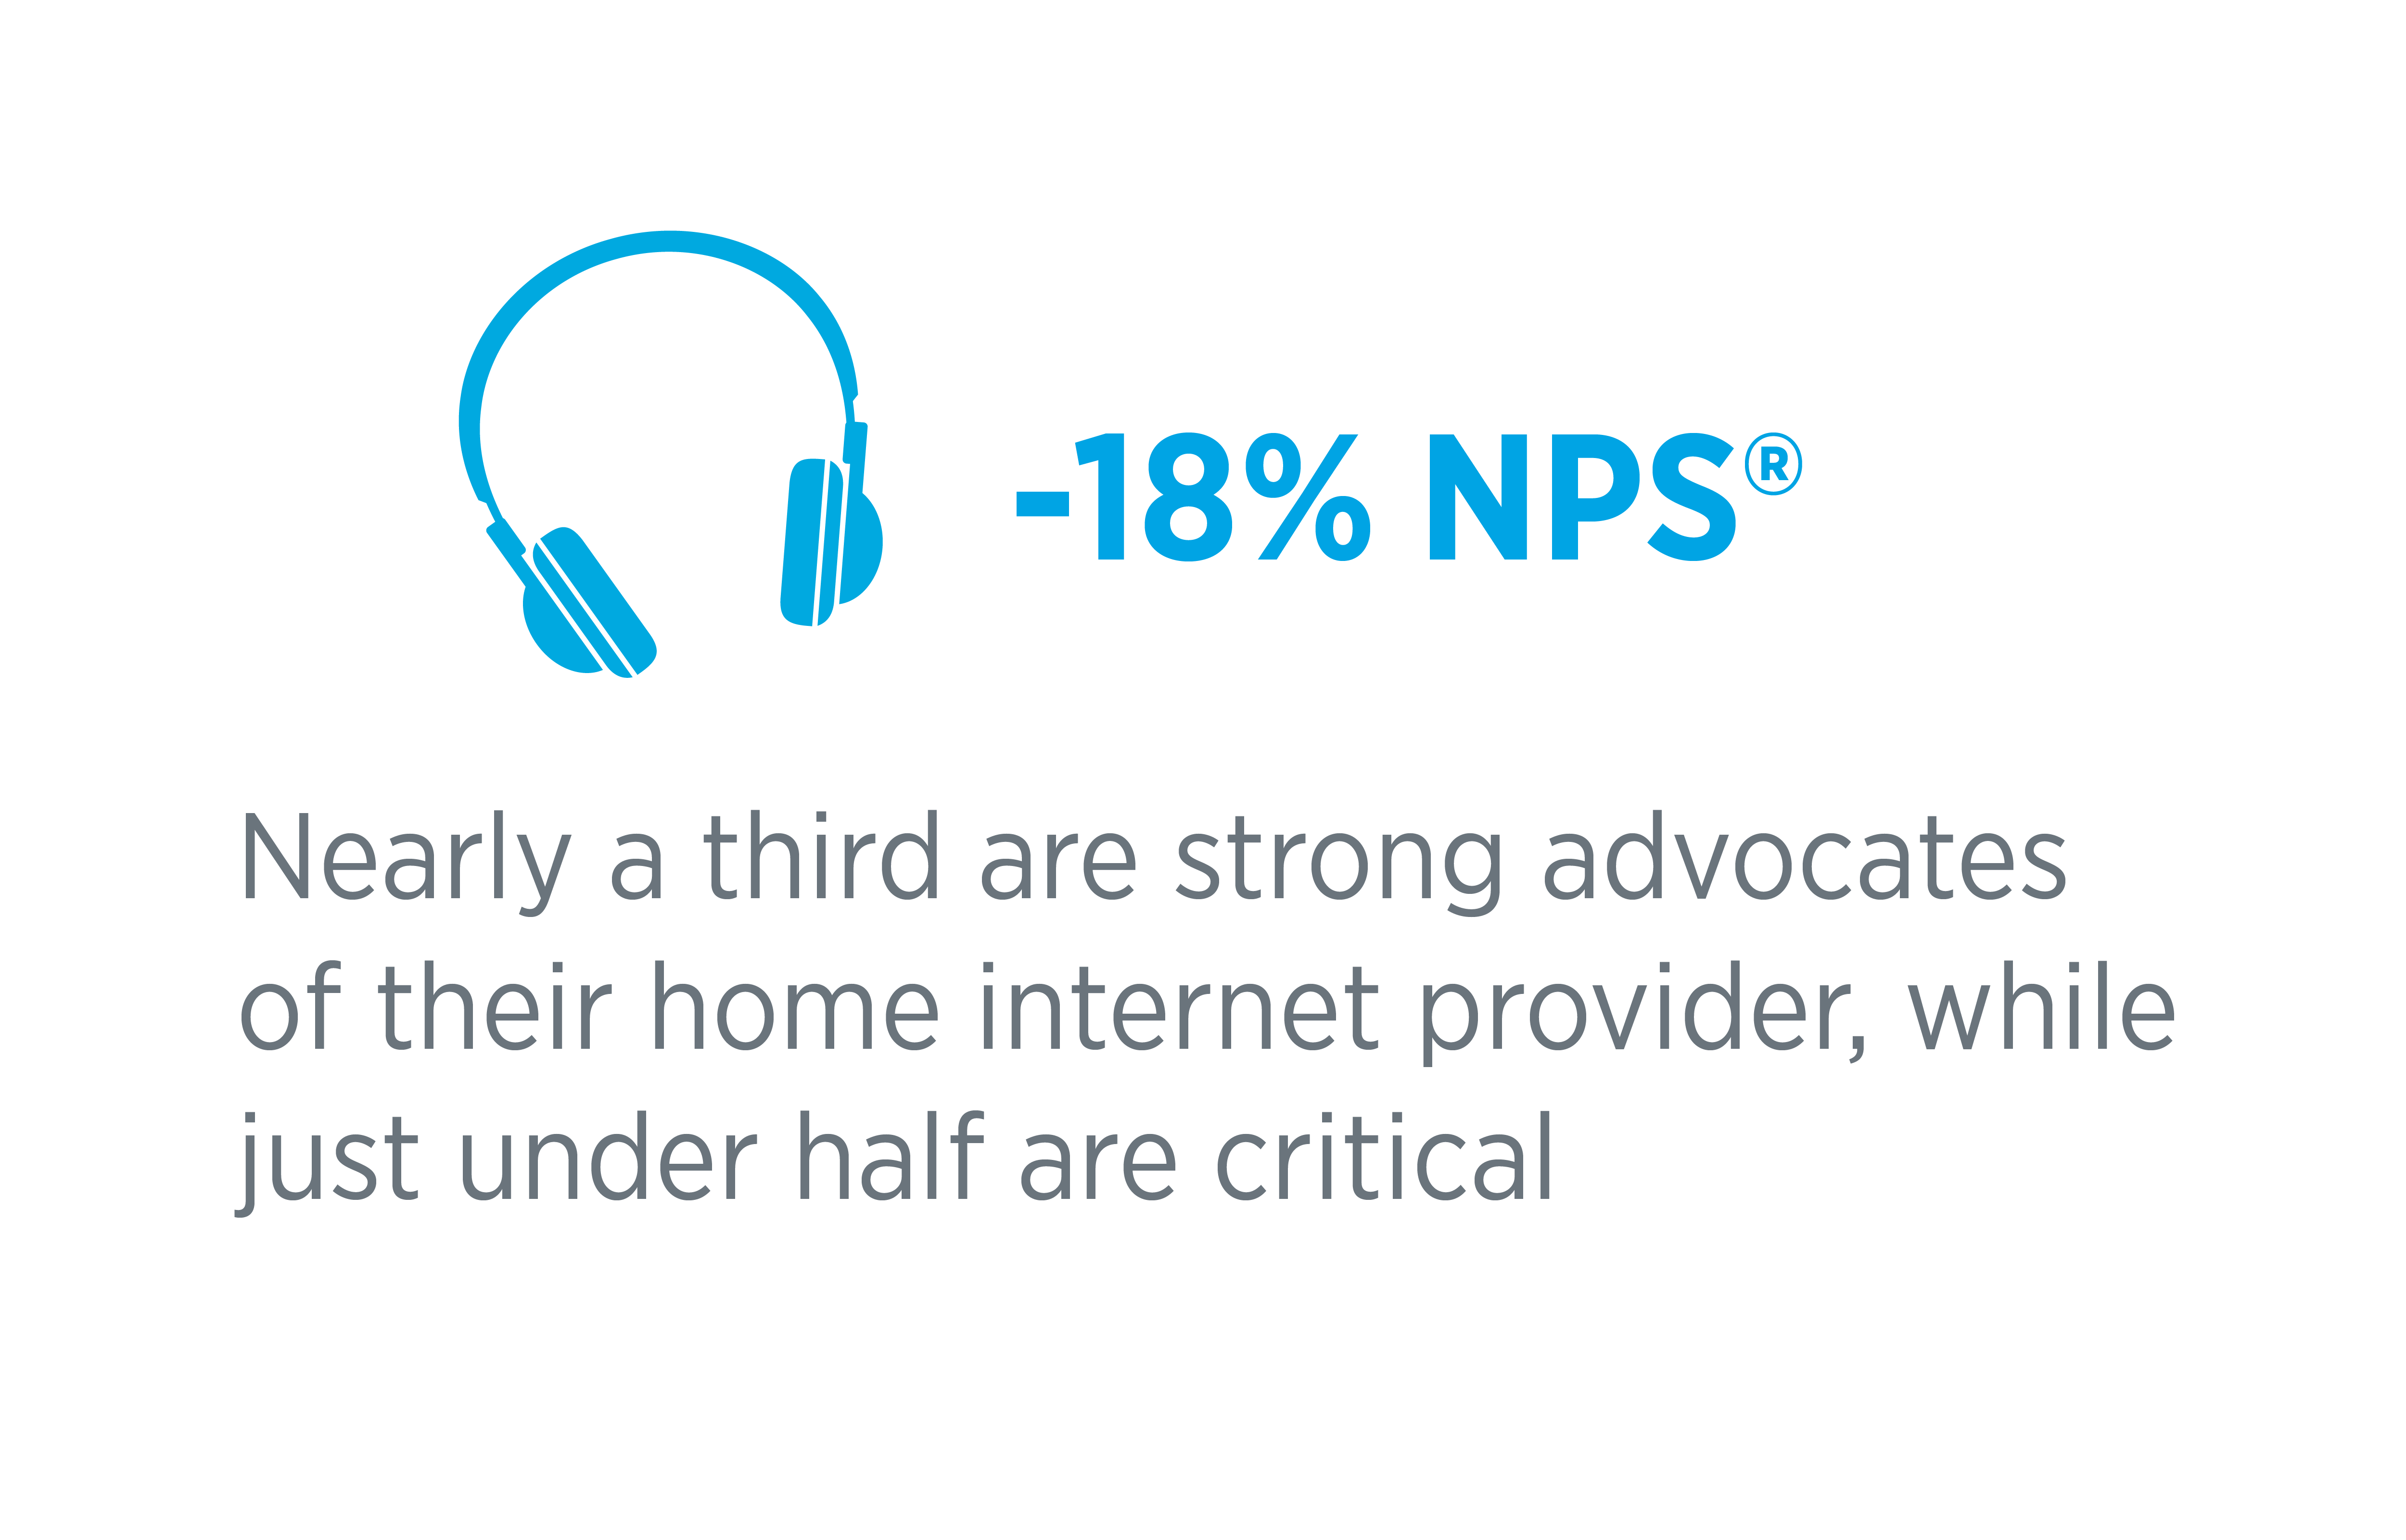 nearly a third are strong advocates of their home internet provider, while just under half are critical